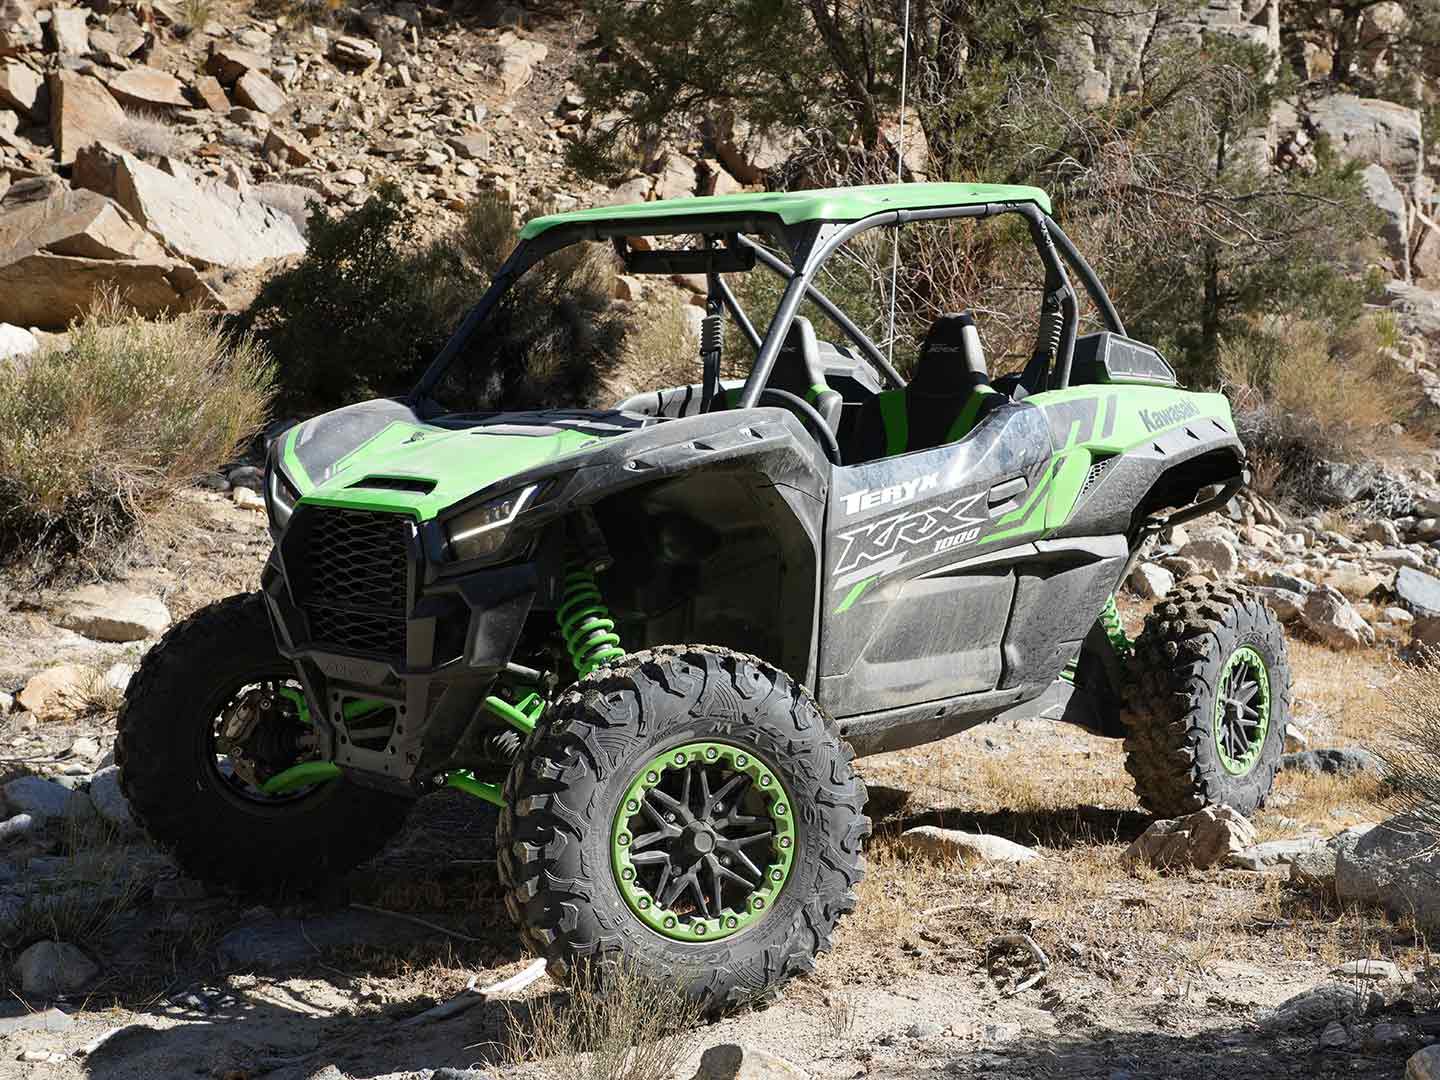 We trade two wheels for four, and go exploring aboard Kawasaki’s easy driving 2023 Teryx KRX 1000.